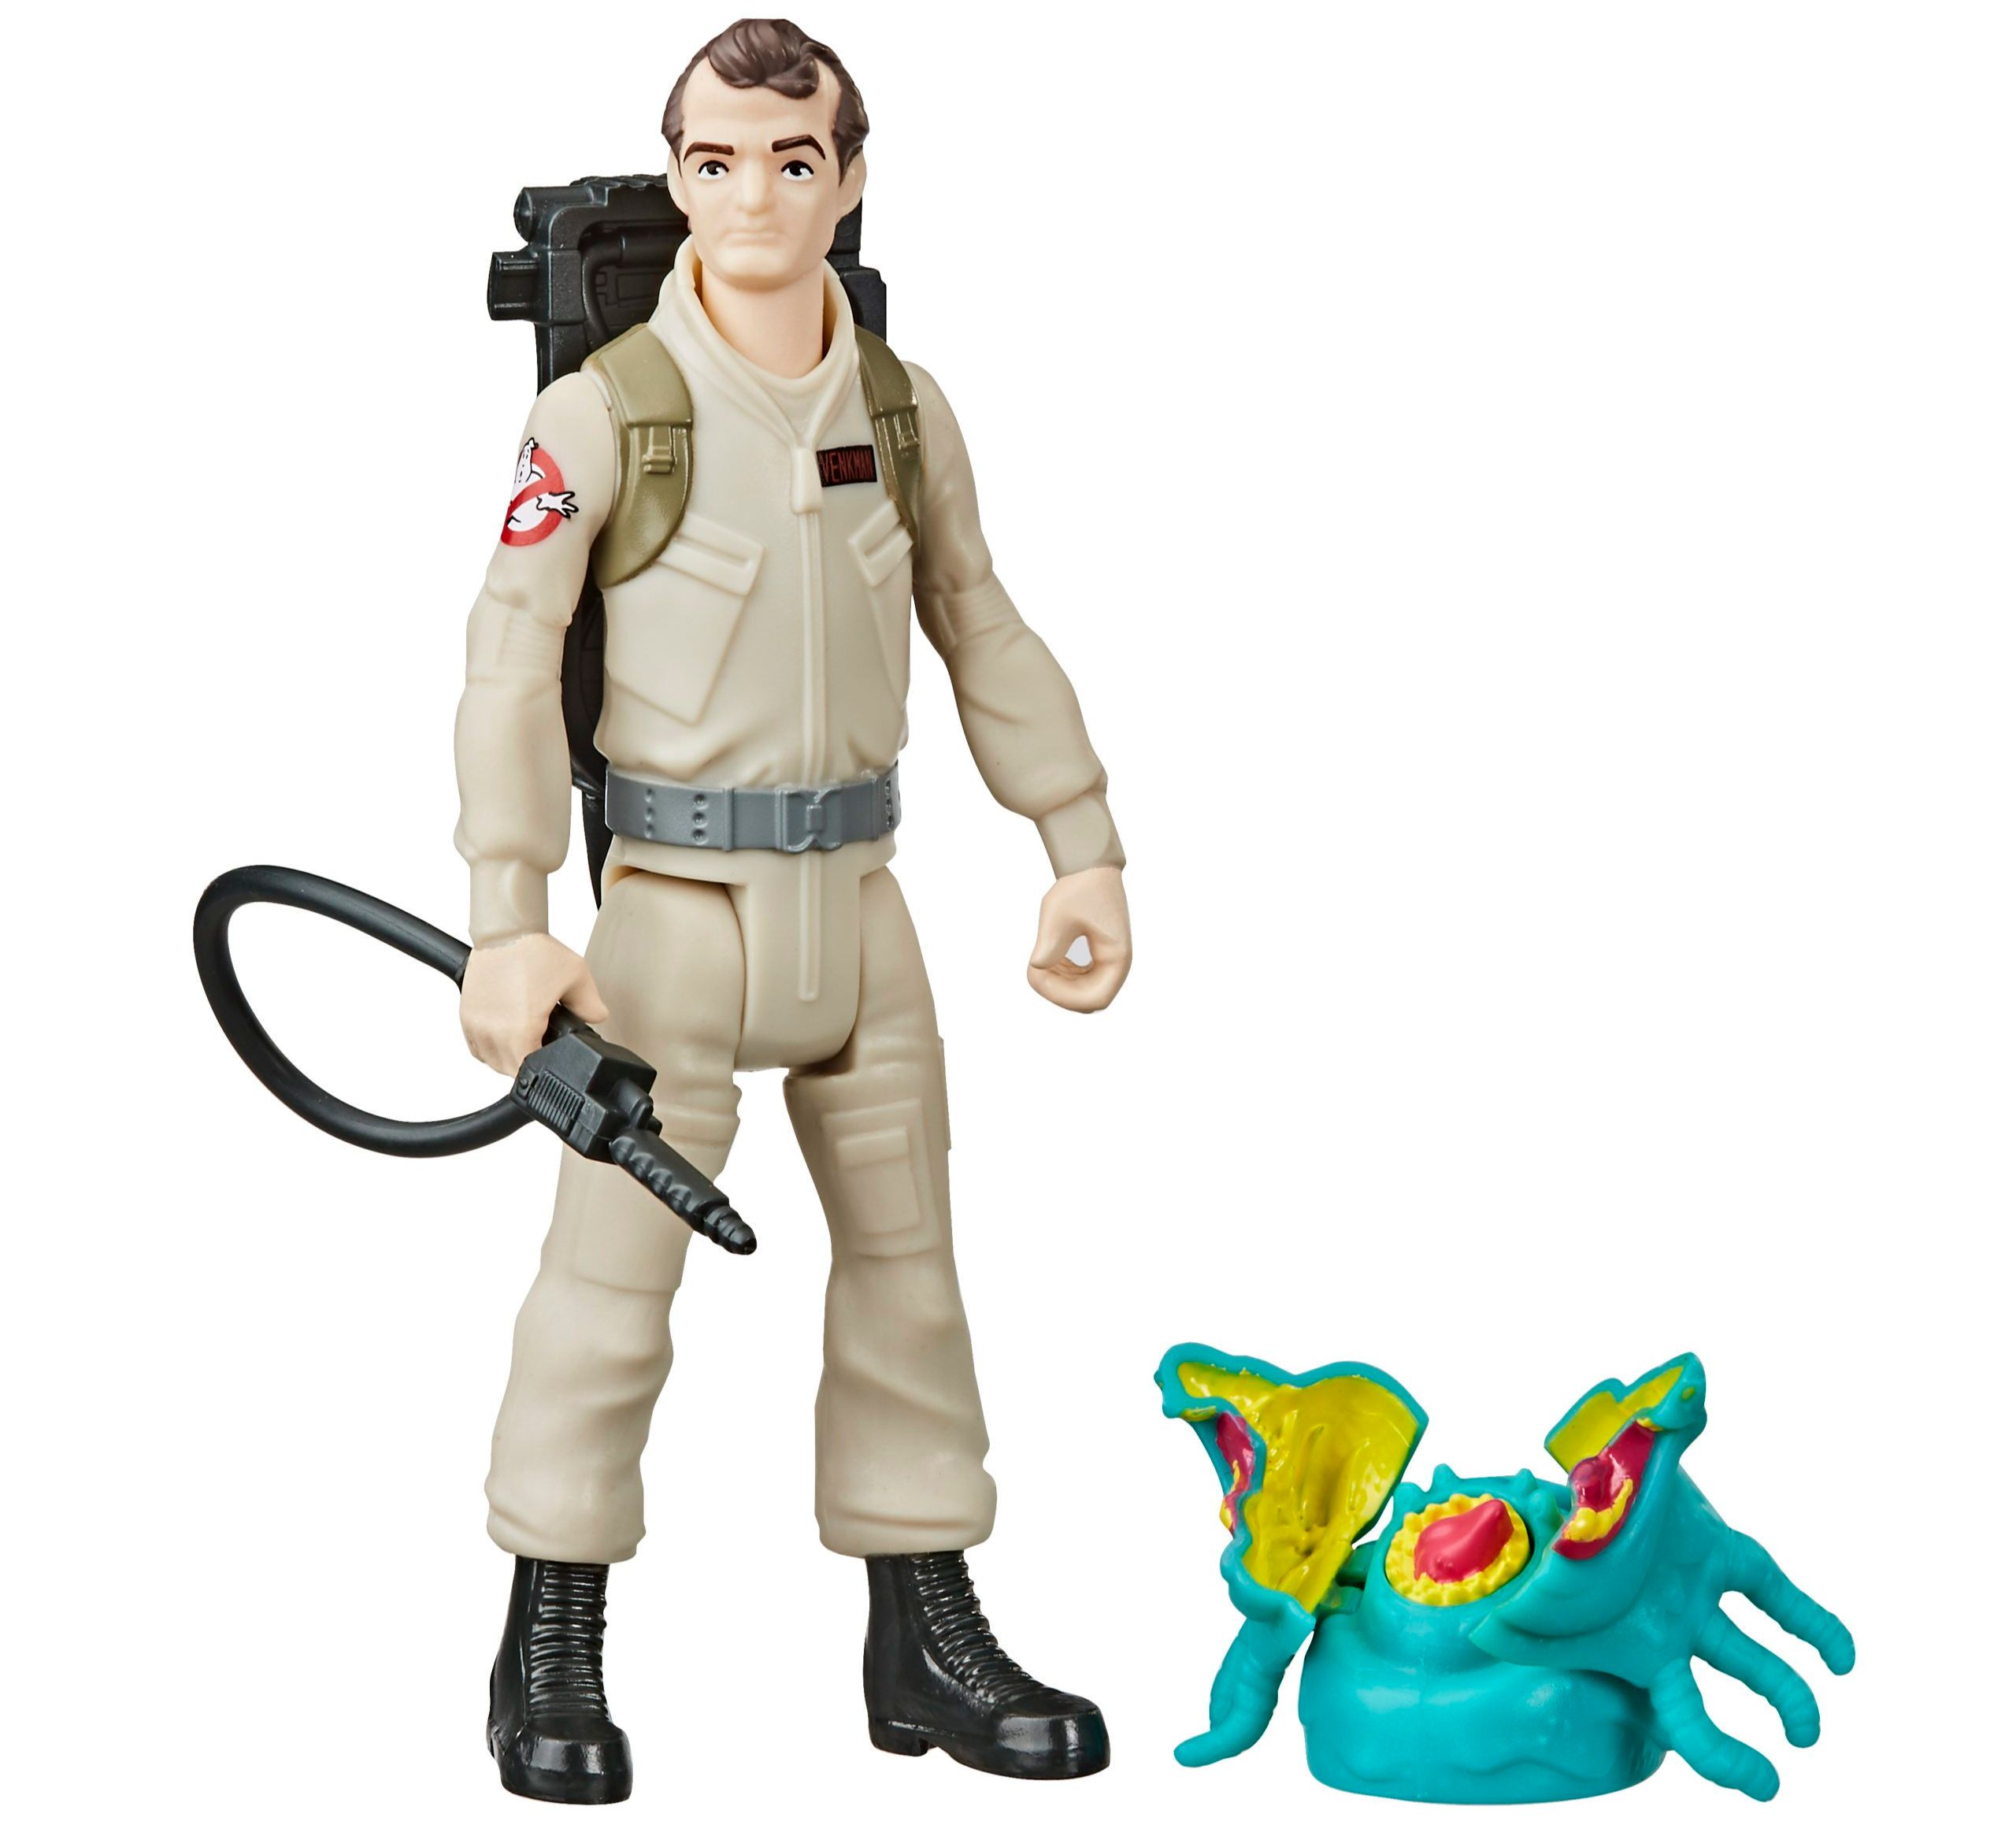 GHOSTBUSTERS 12-INCH SCALE FIGURES